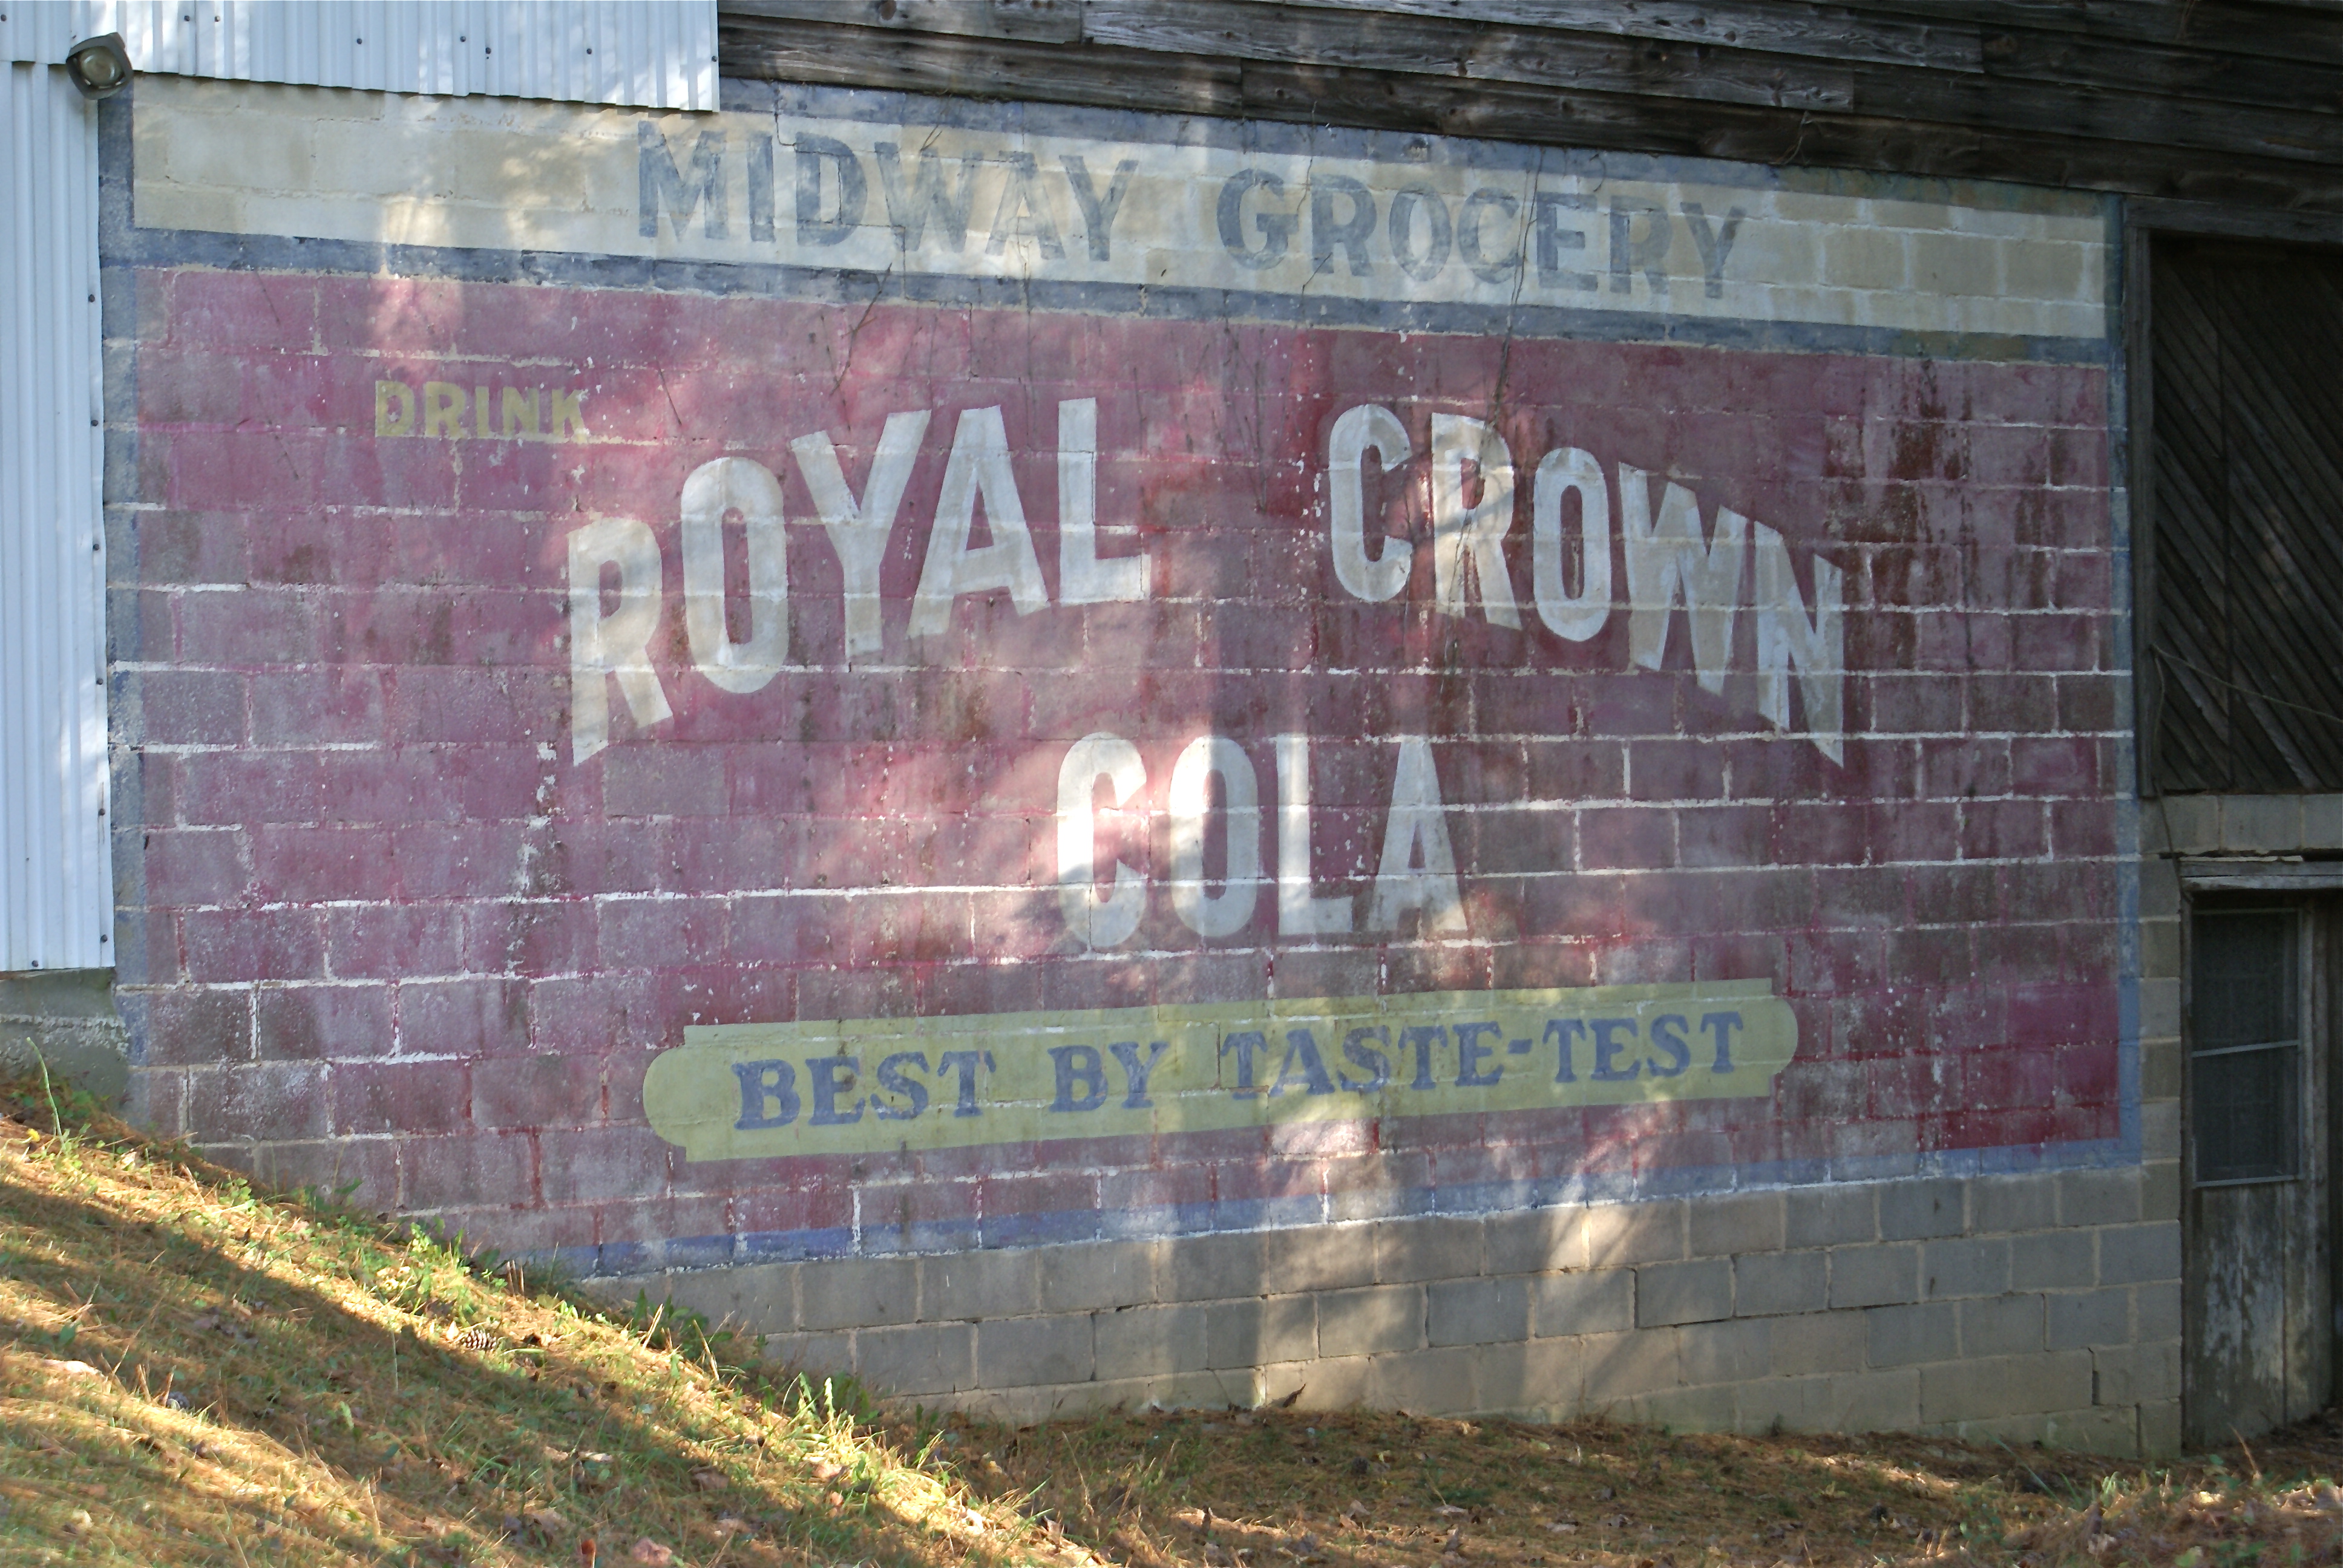 RC Cola Wall Painted